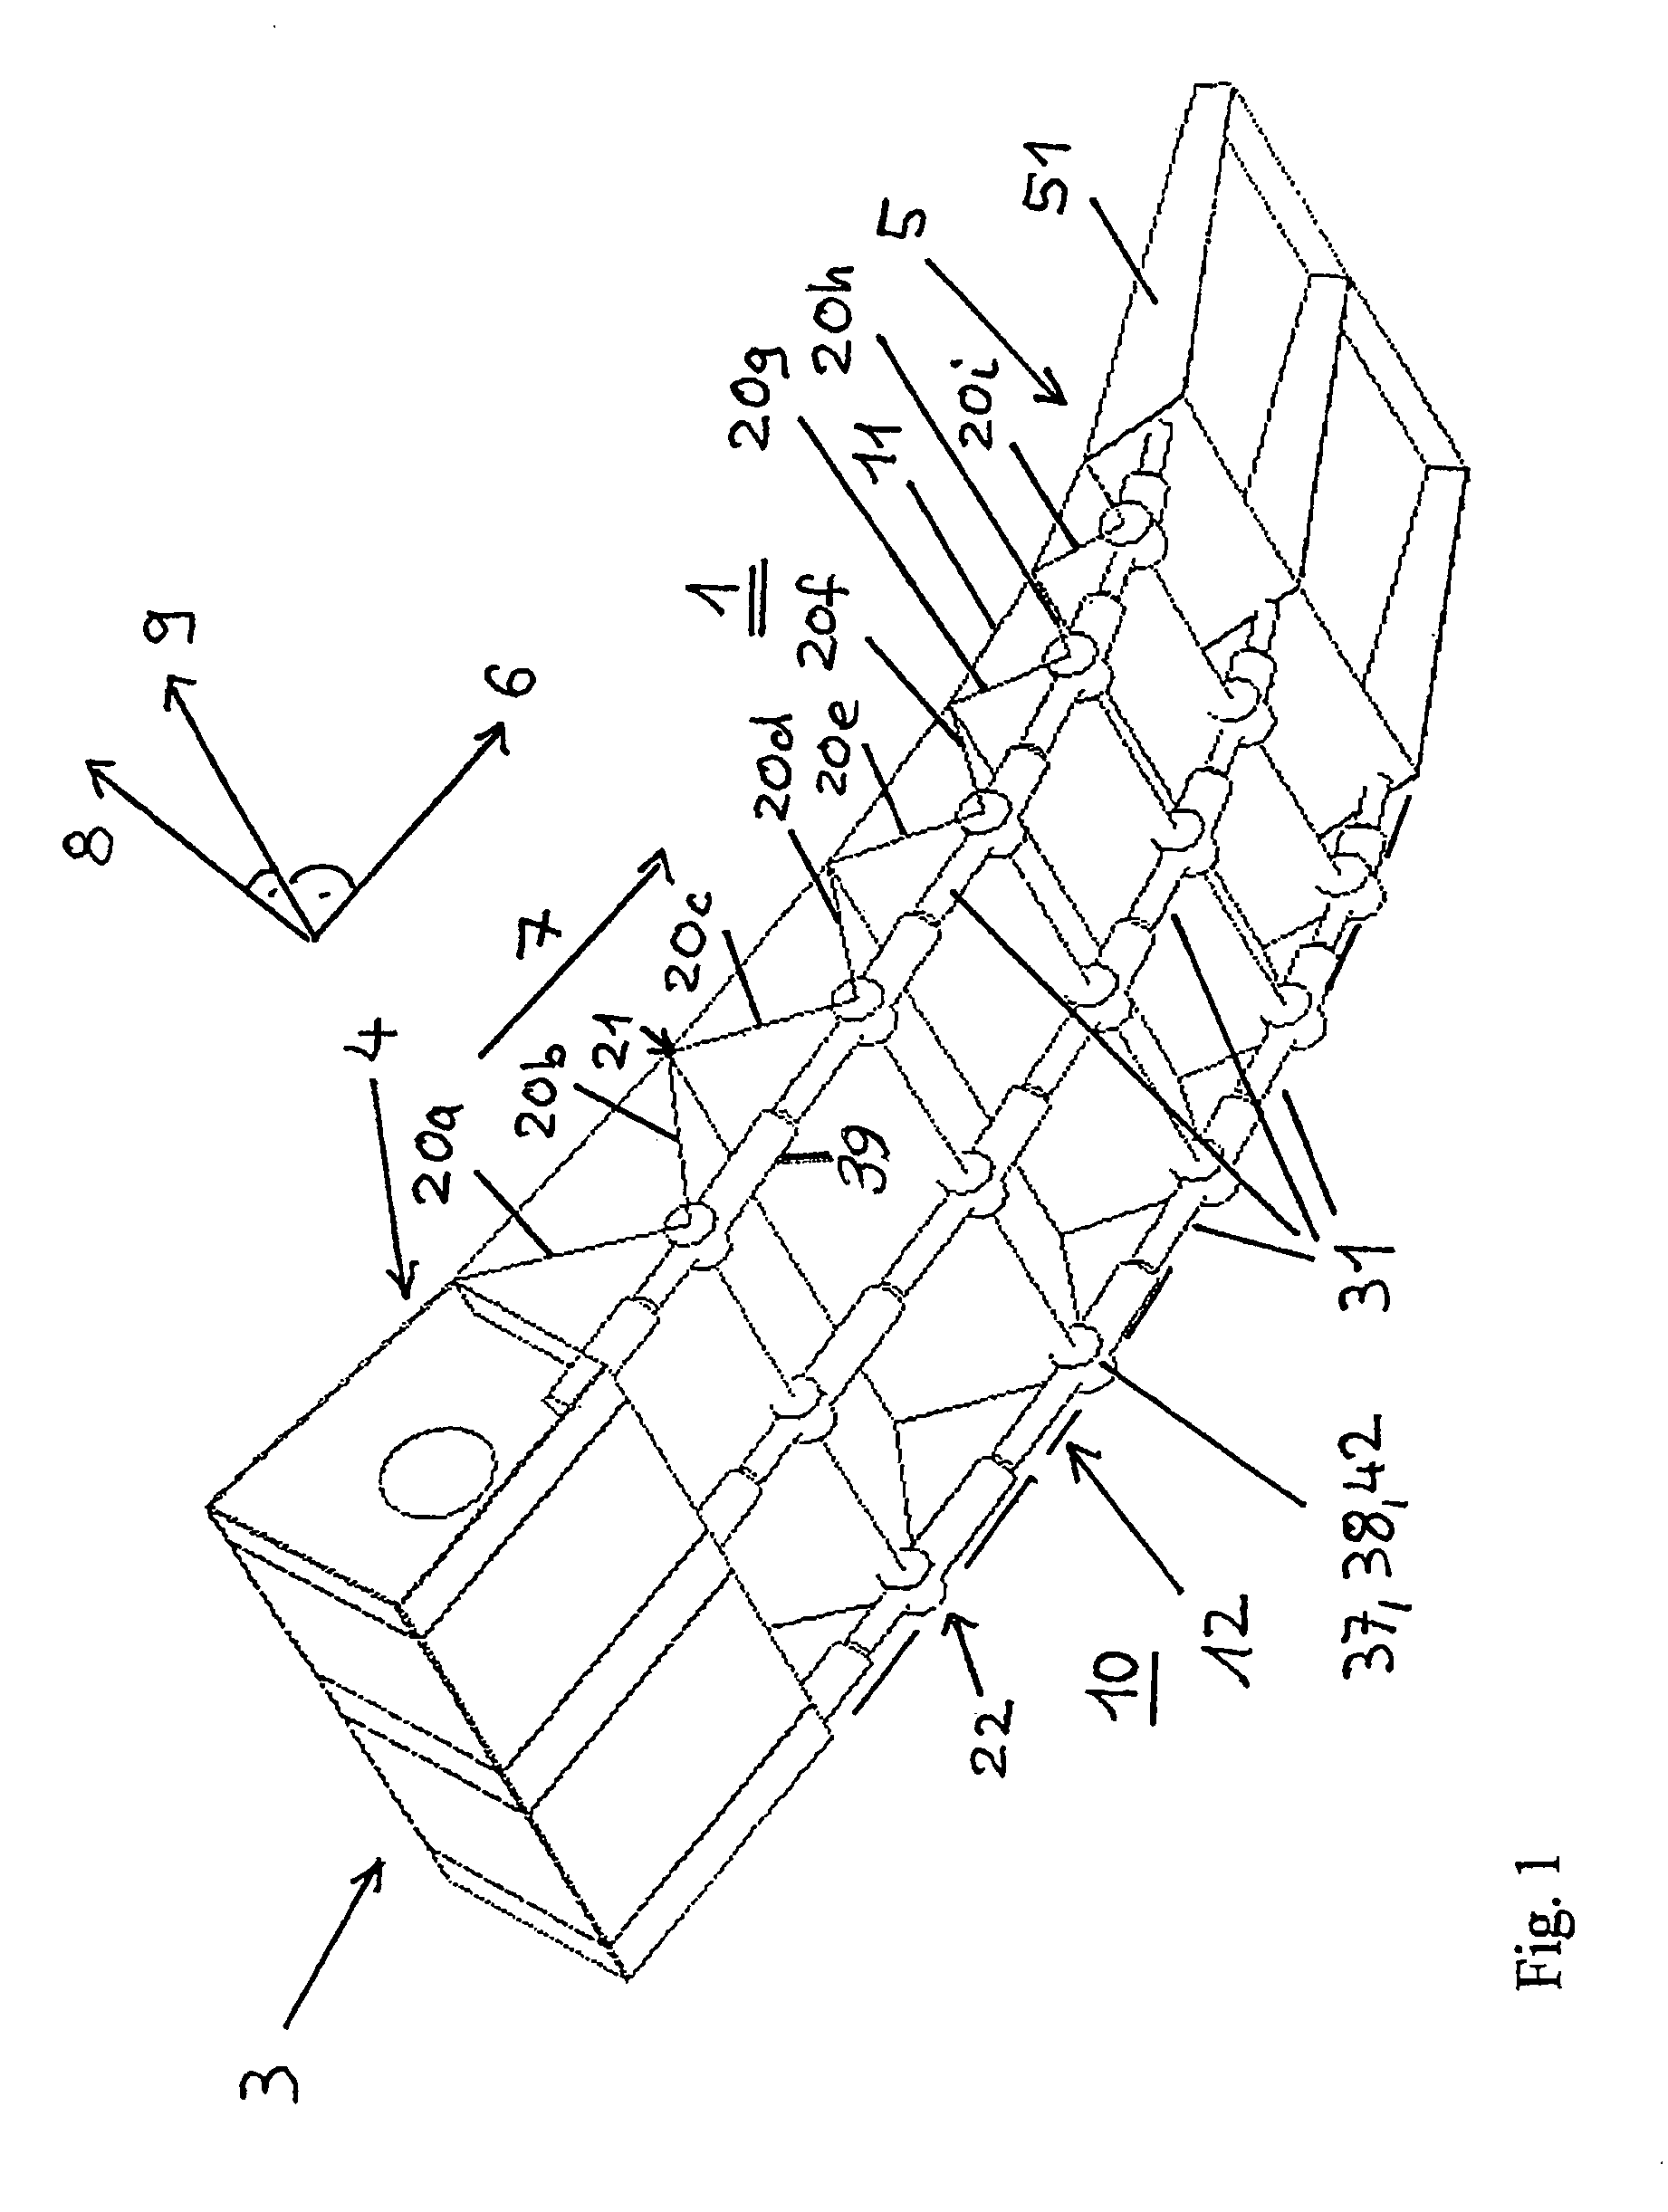 Wing, in particular airfoil of an aircraft, with a variable profile shape